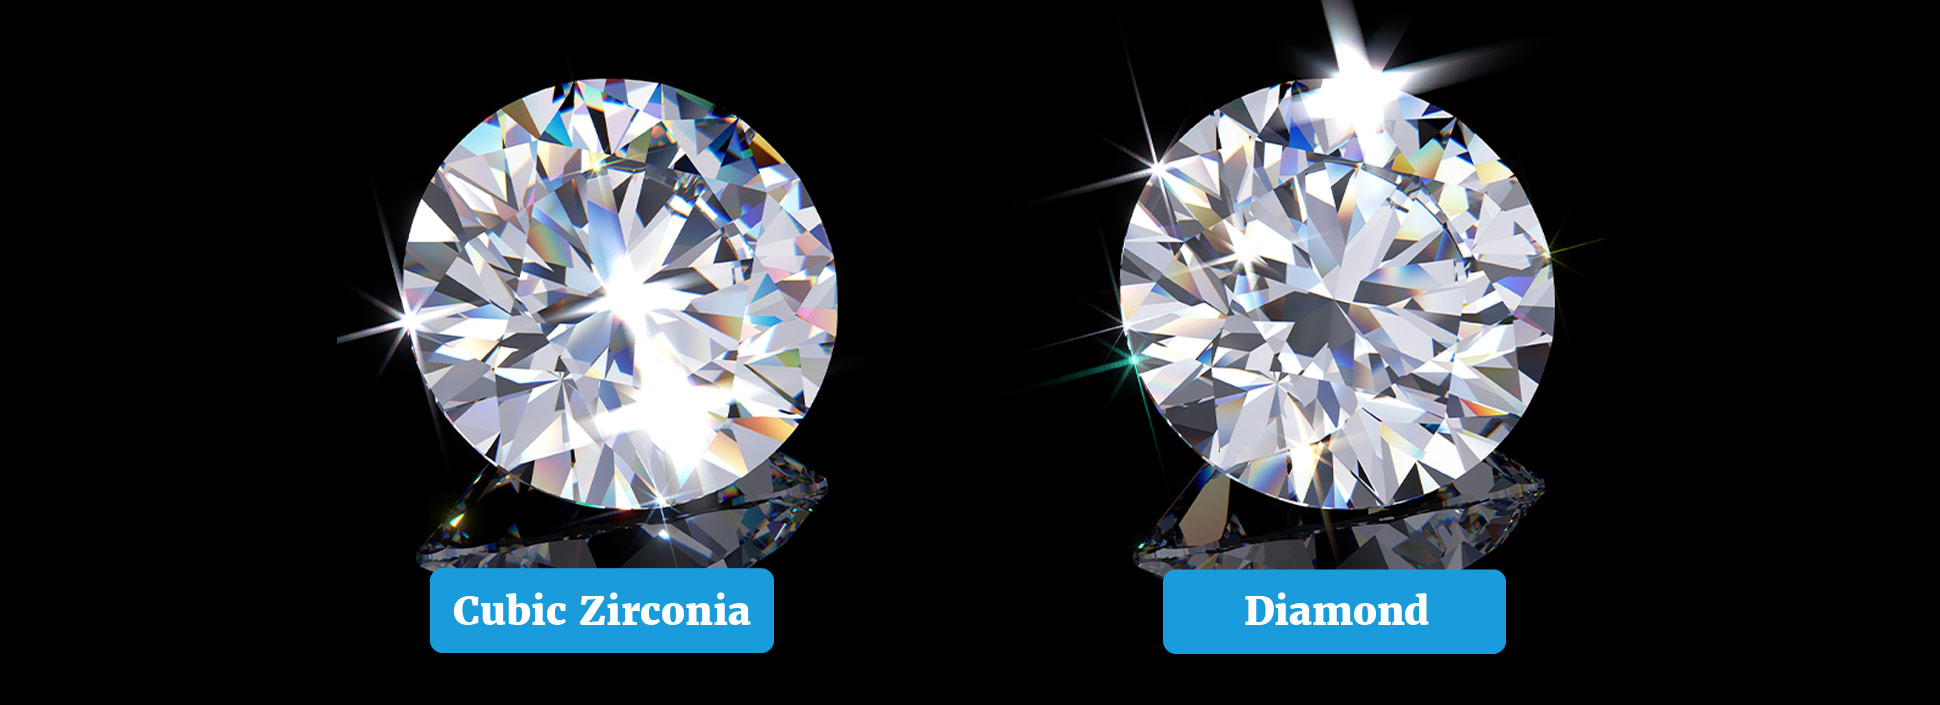 Cubic Zirconia vs Diamond: How to Tell the Difference